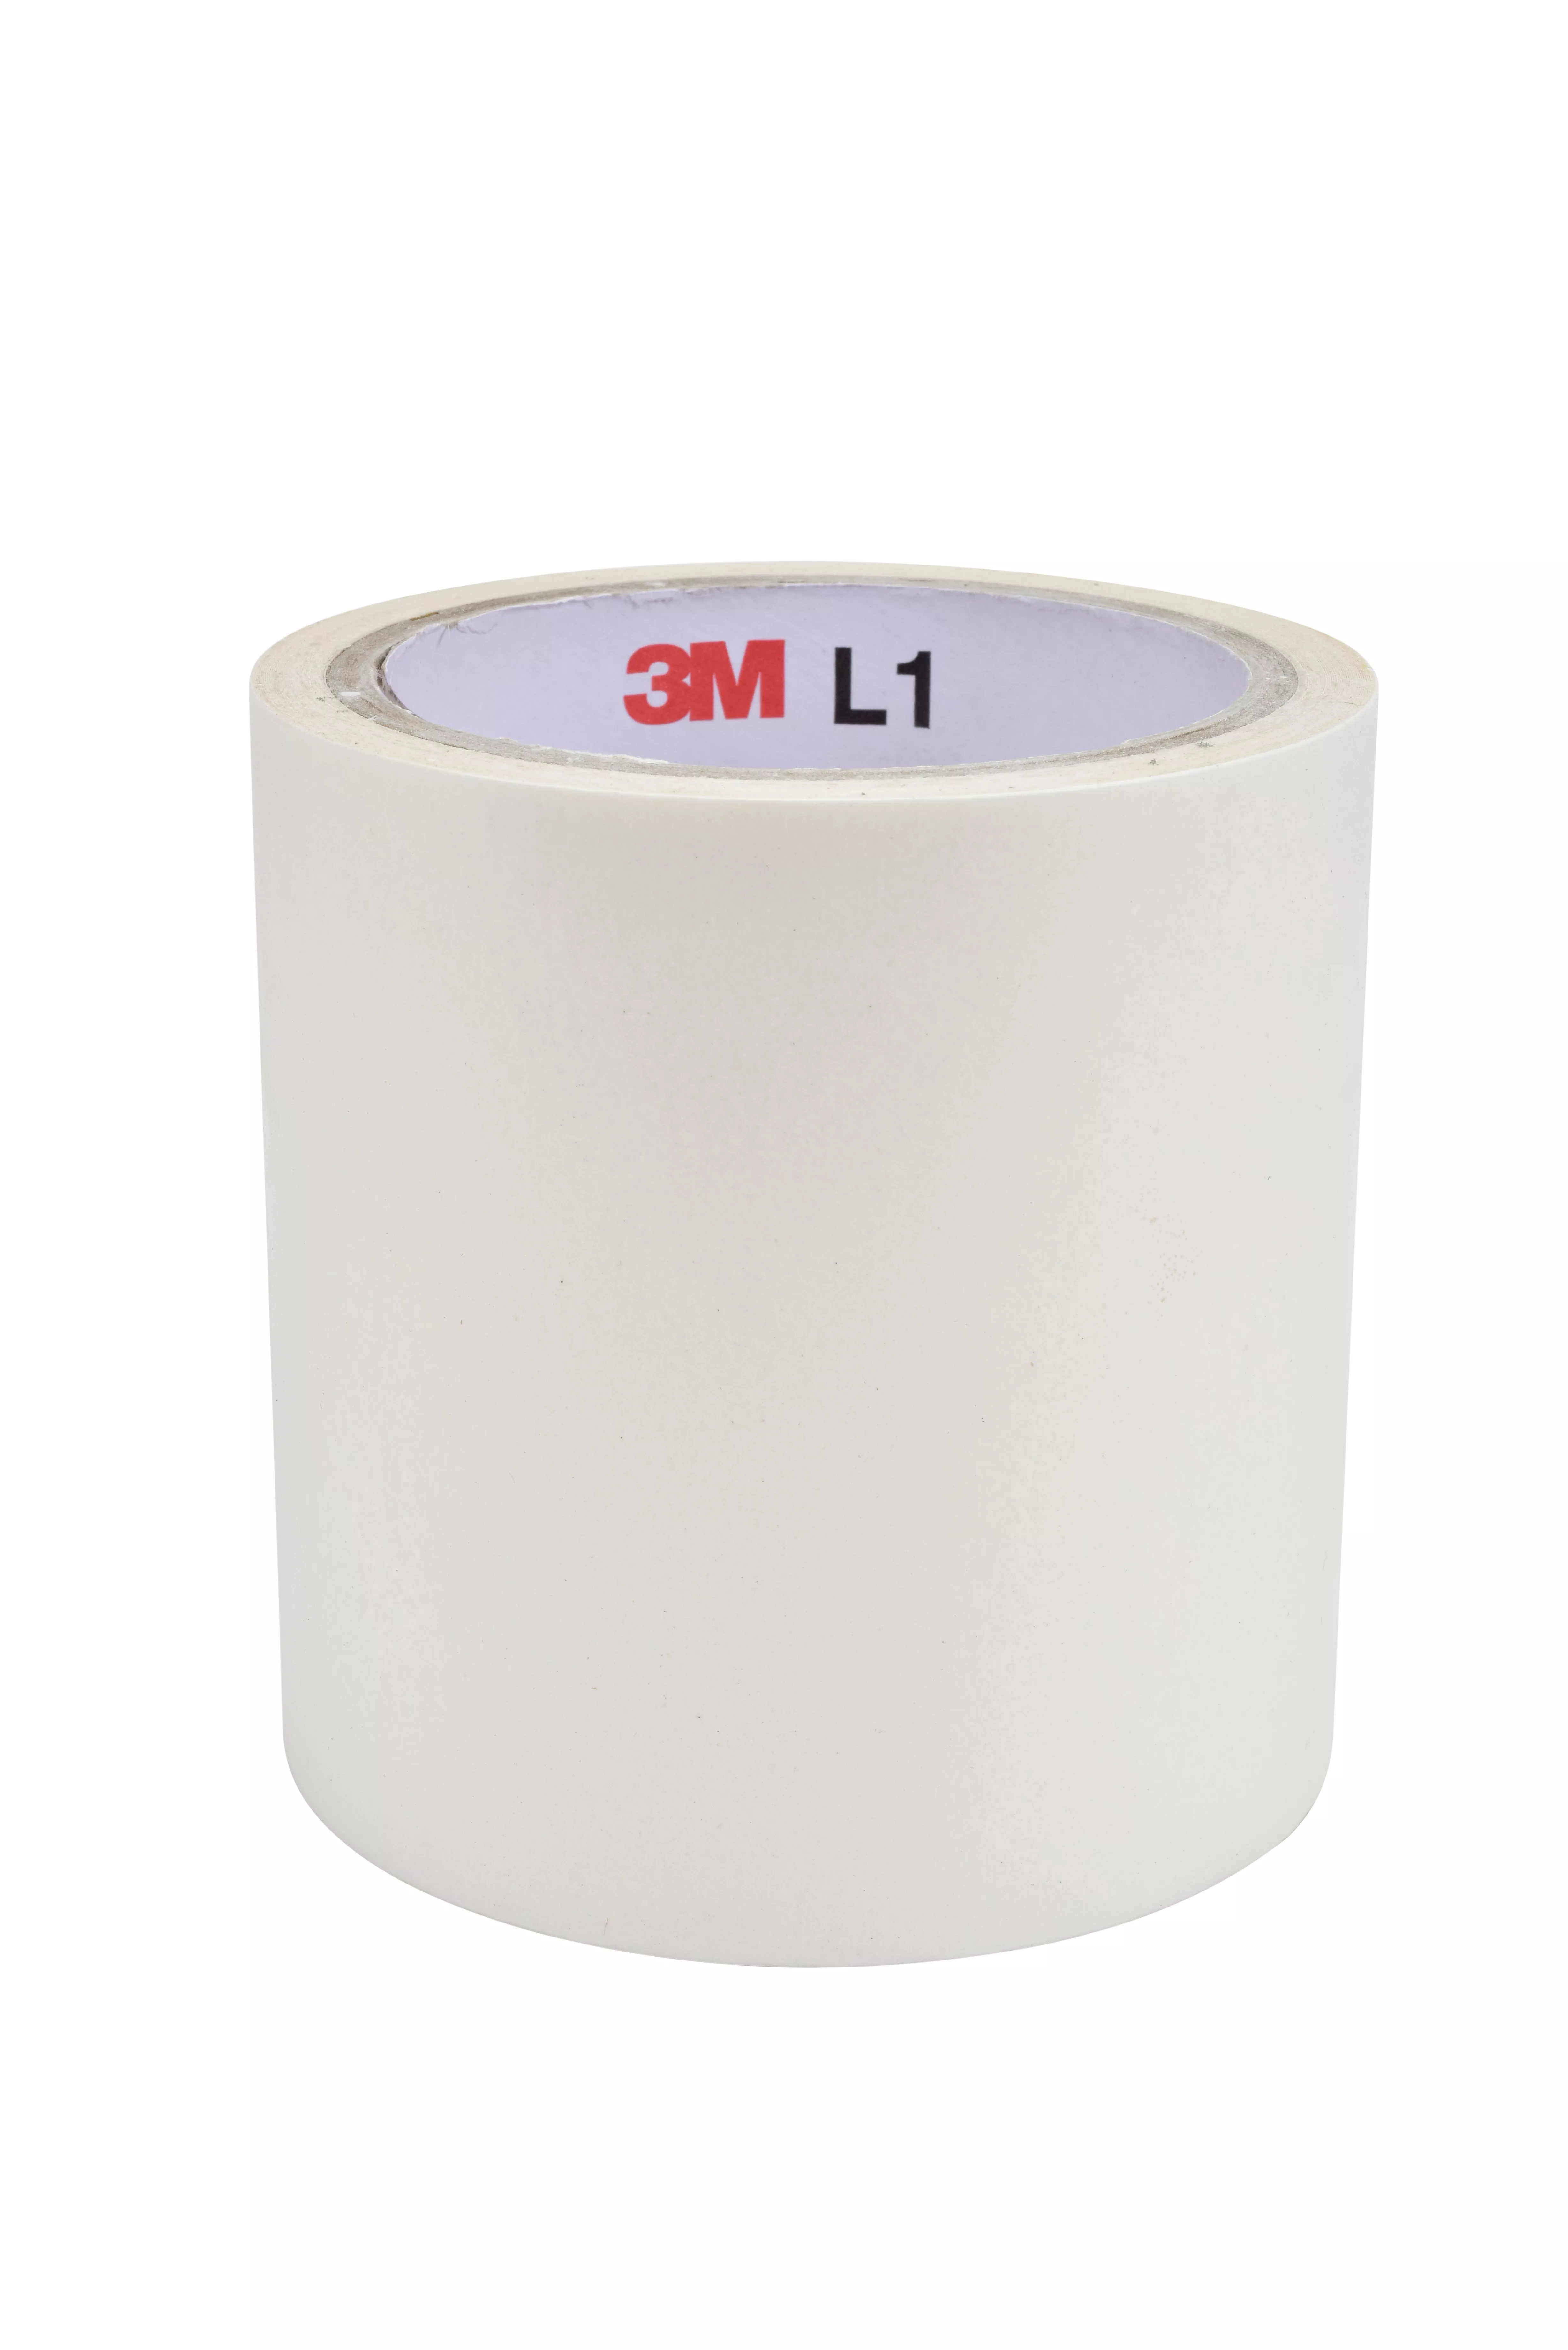 3M™ Scrim Reinforced Adhesive Tape L1+RT, Clear, 1372 mm x 230 m, 0.08
mm, 6 Roll/Pallet